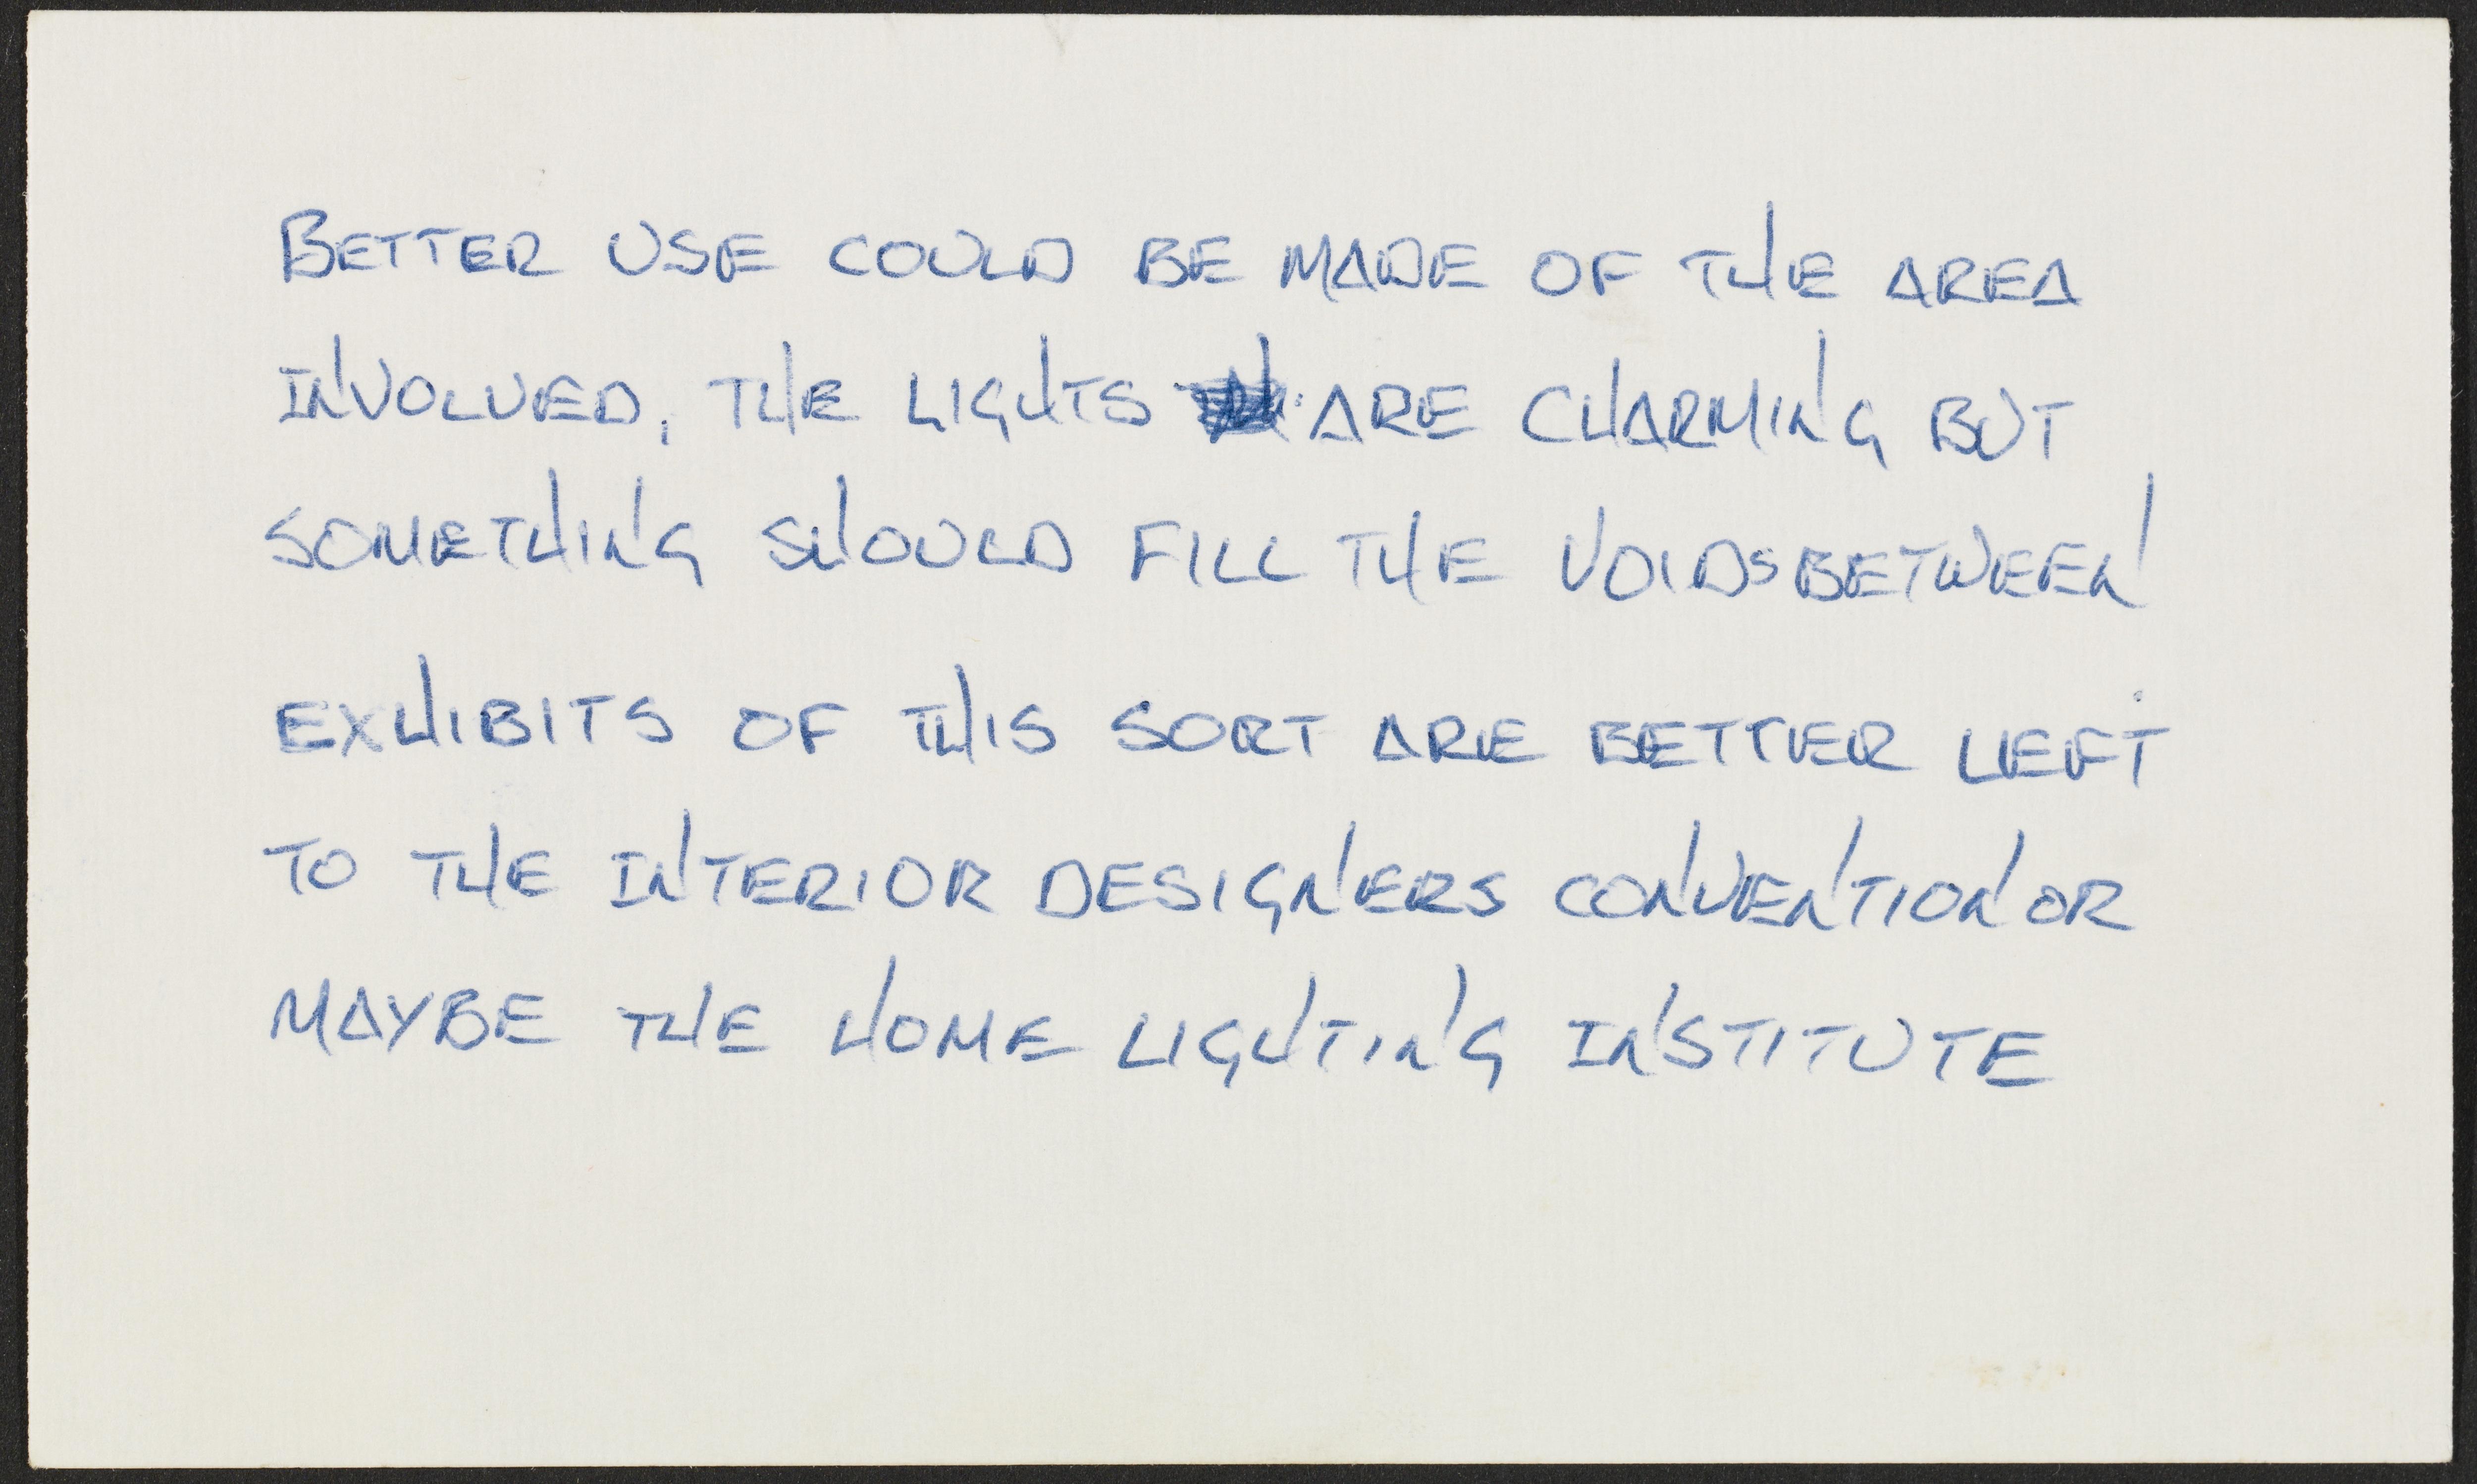 An index card with handwritten text "Better use could be made of the area involved, the lights are charming but something should fill the voids between exhibits of this sort are better left to the interior designers convention or maybe the home lighting institute"